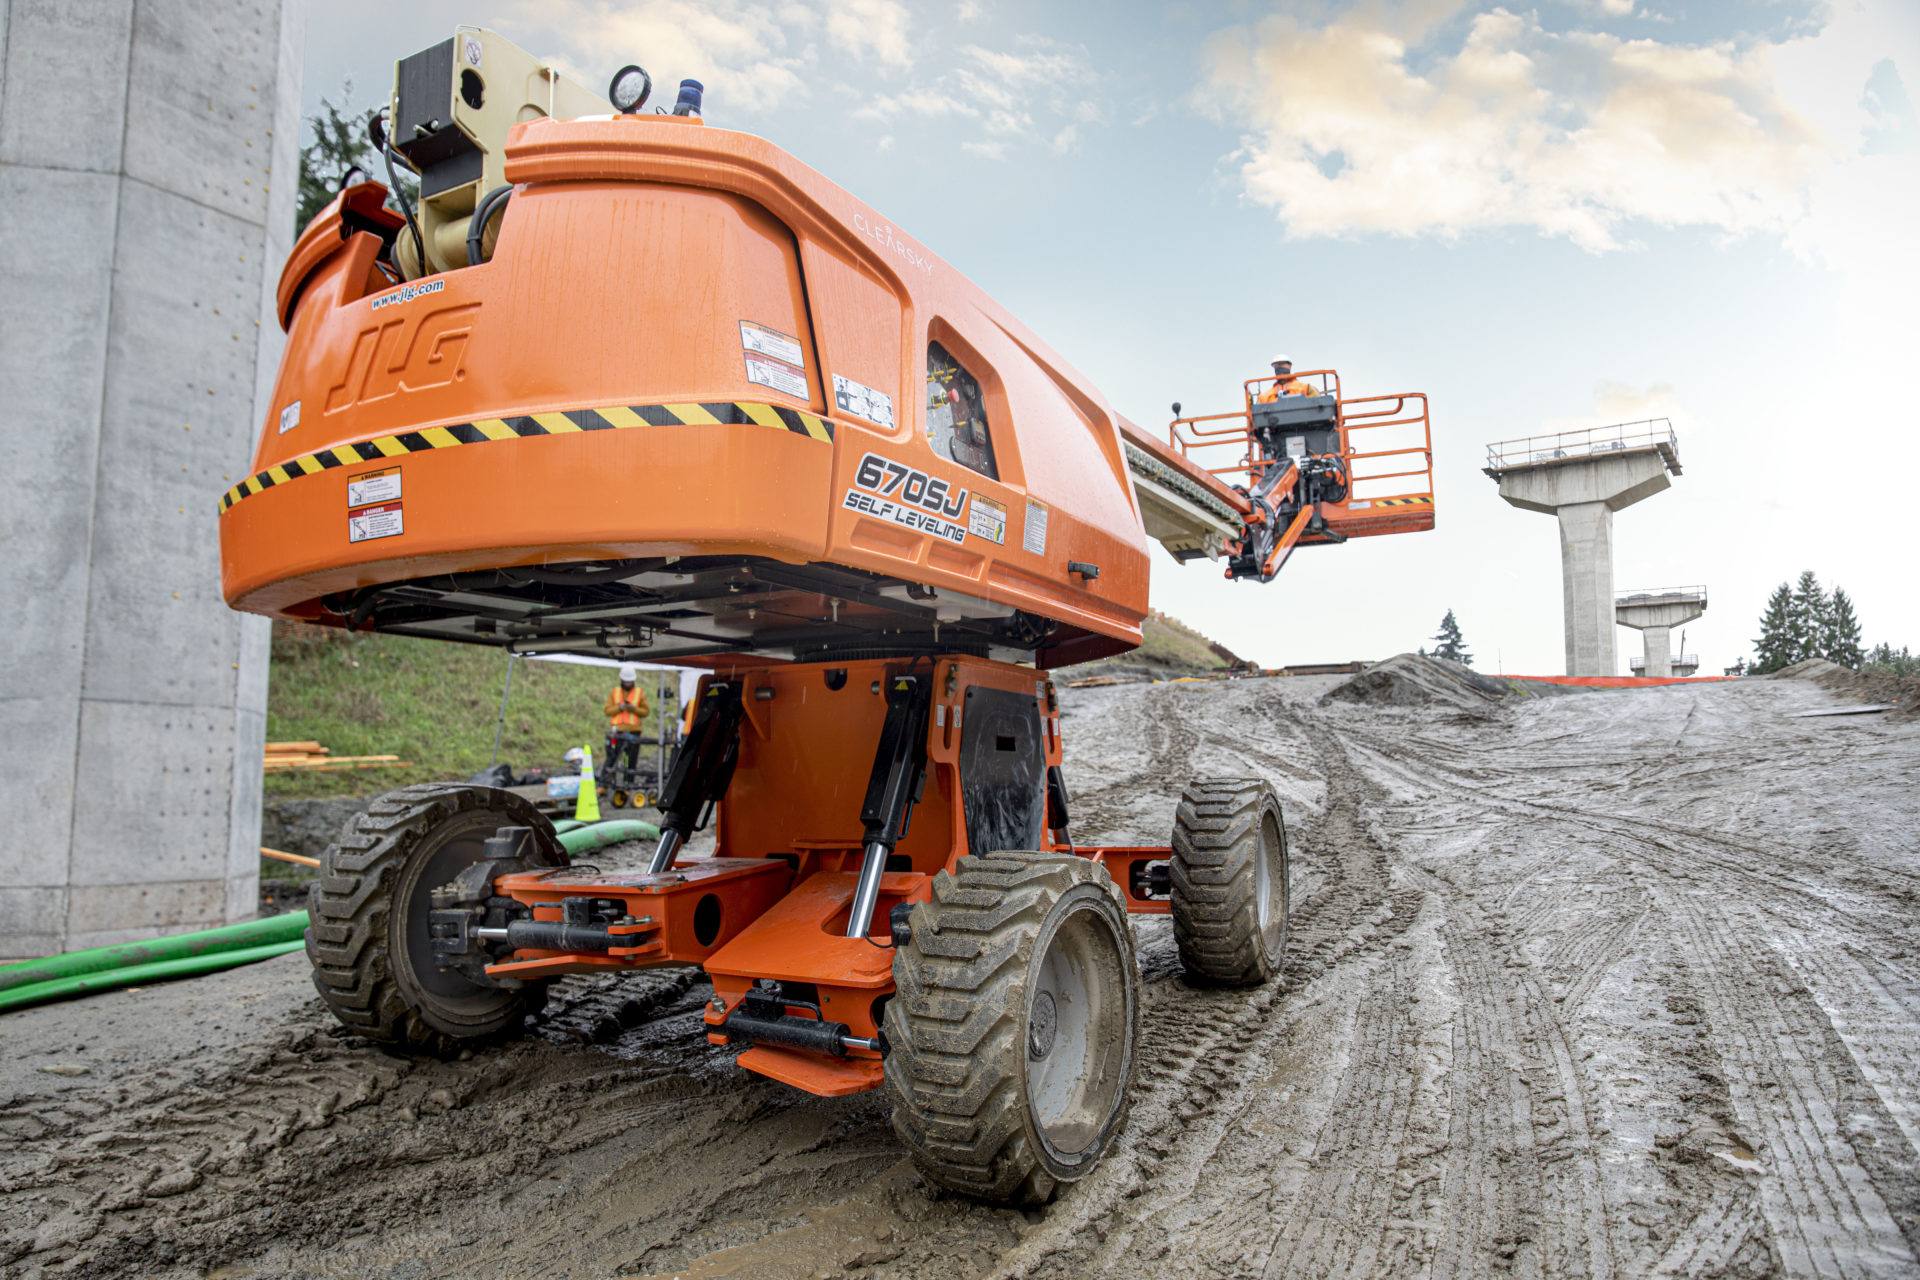 JLG Industries is once again seeking to change the way people work at heigh...